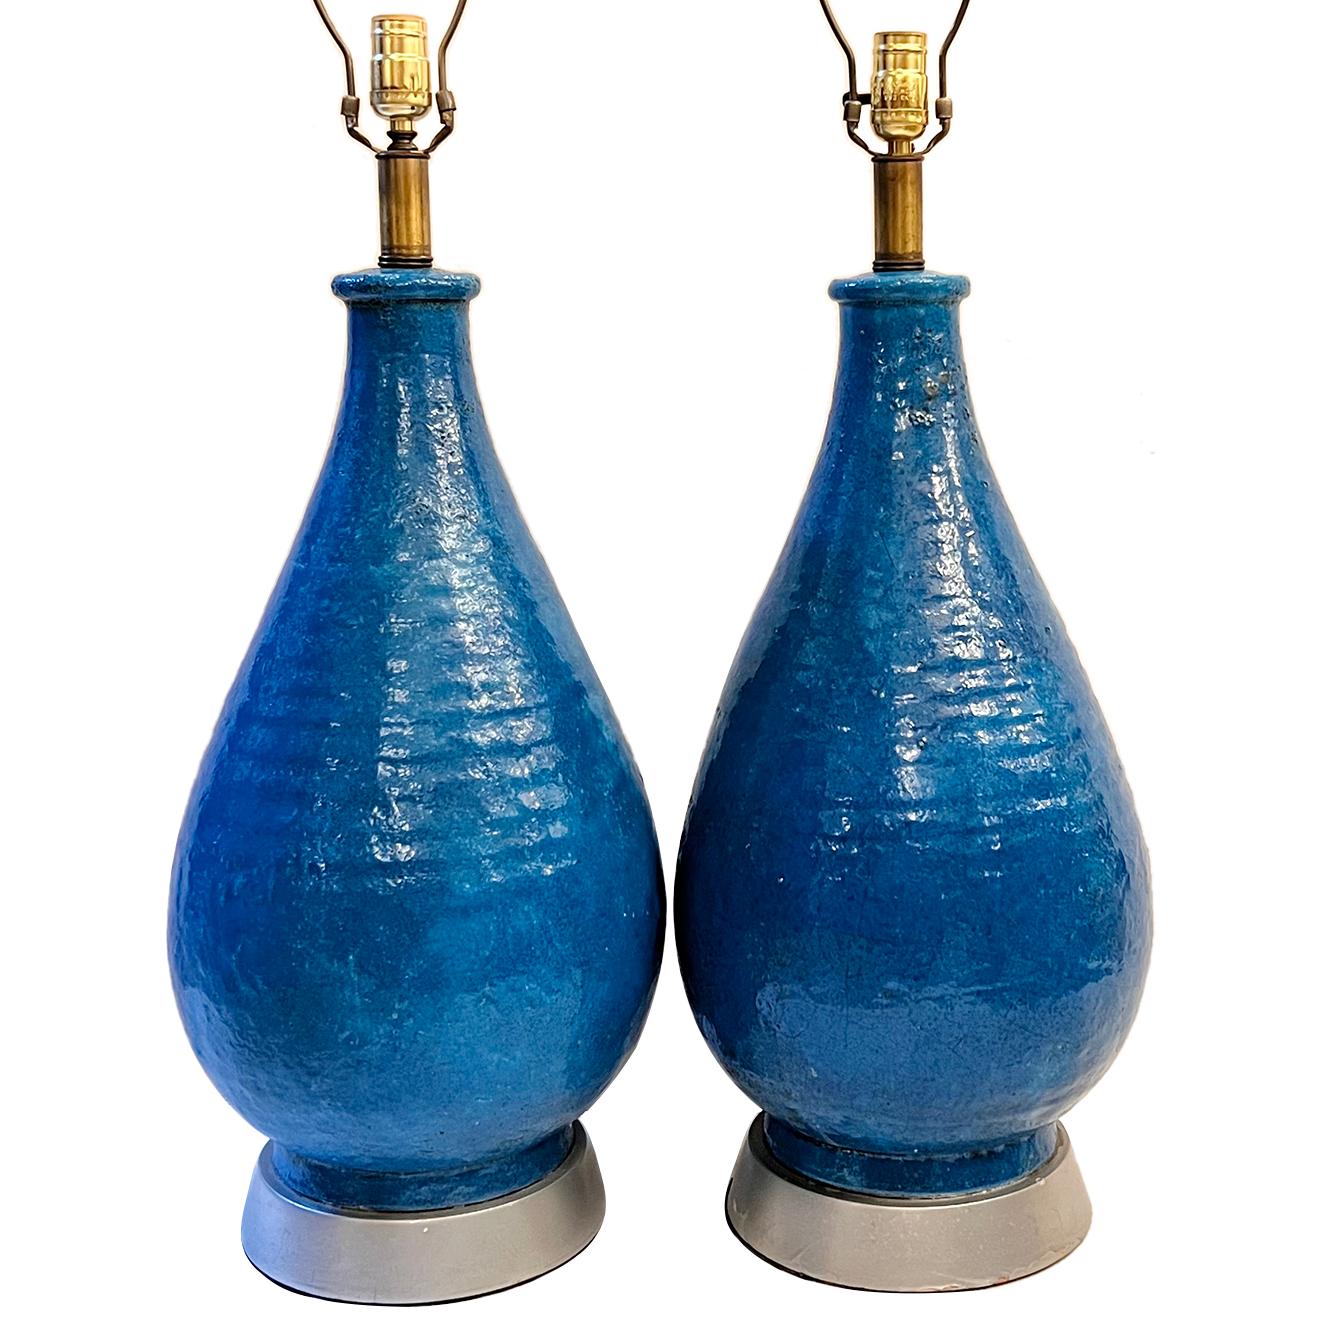 Pair of circa 1960's Italian large blue ceramic table lamps with painted wooden bases.

Measurements:
Height of body 23